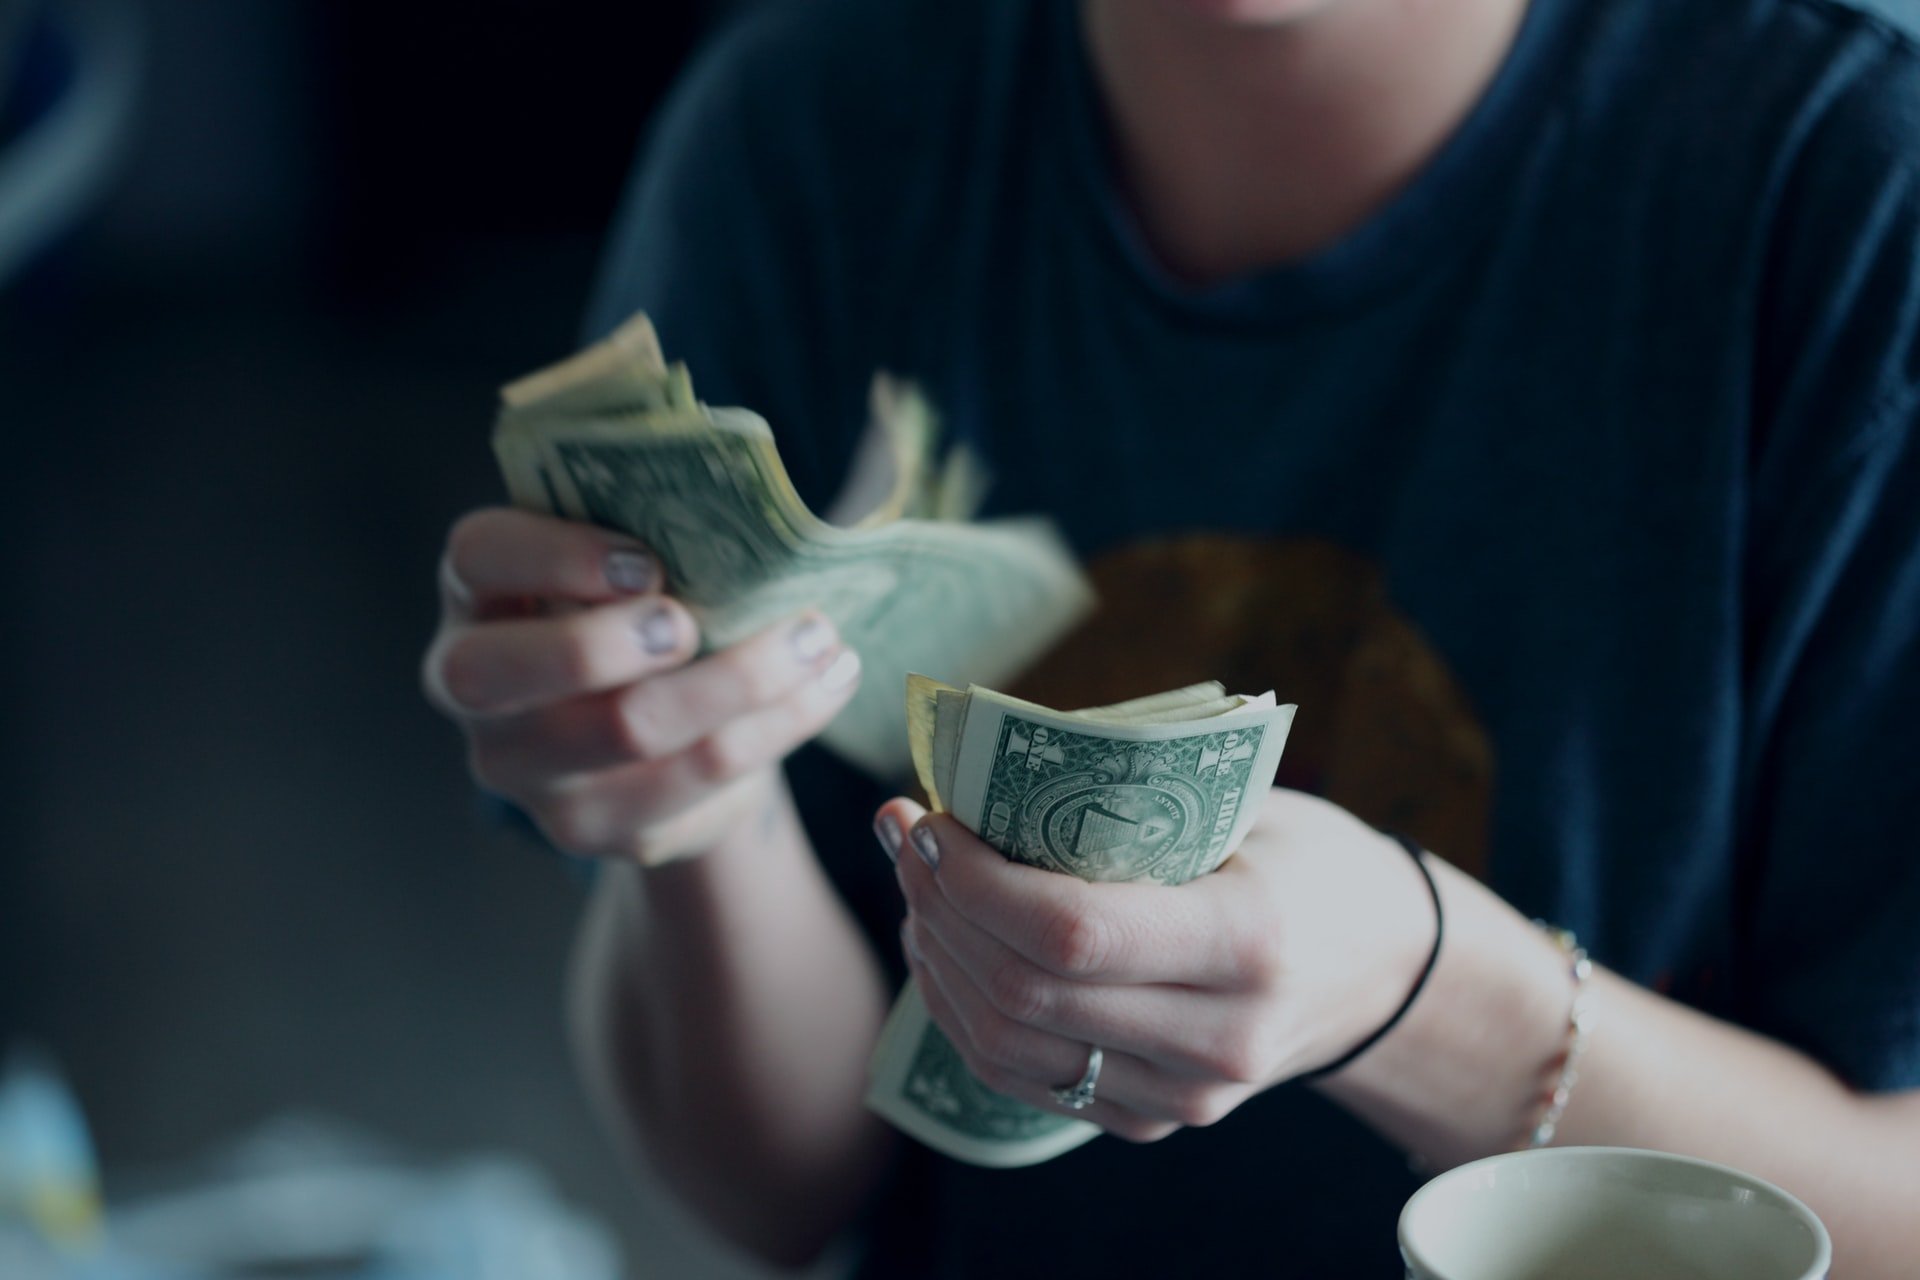 She was delighted to receive her salary | Source: Unsplash